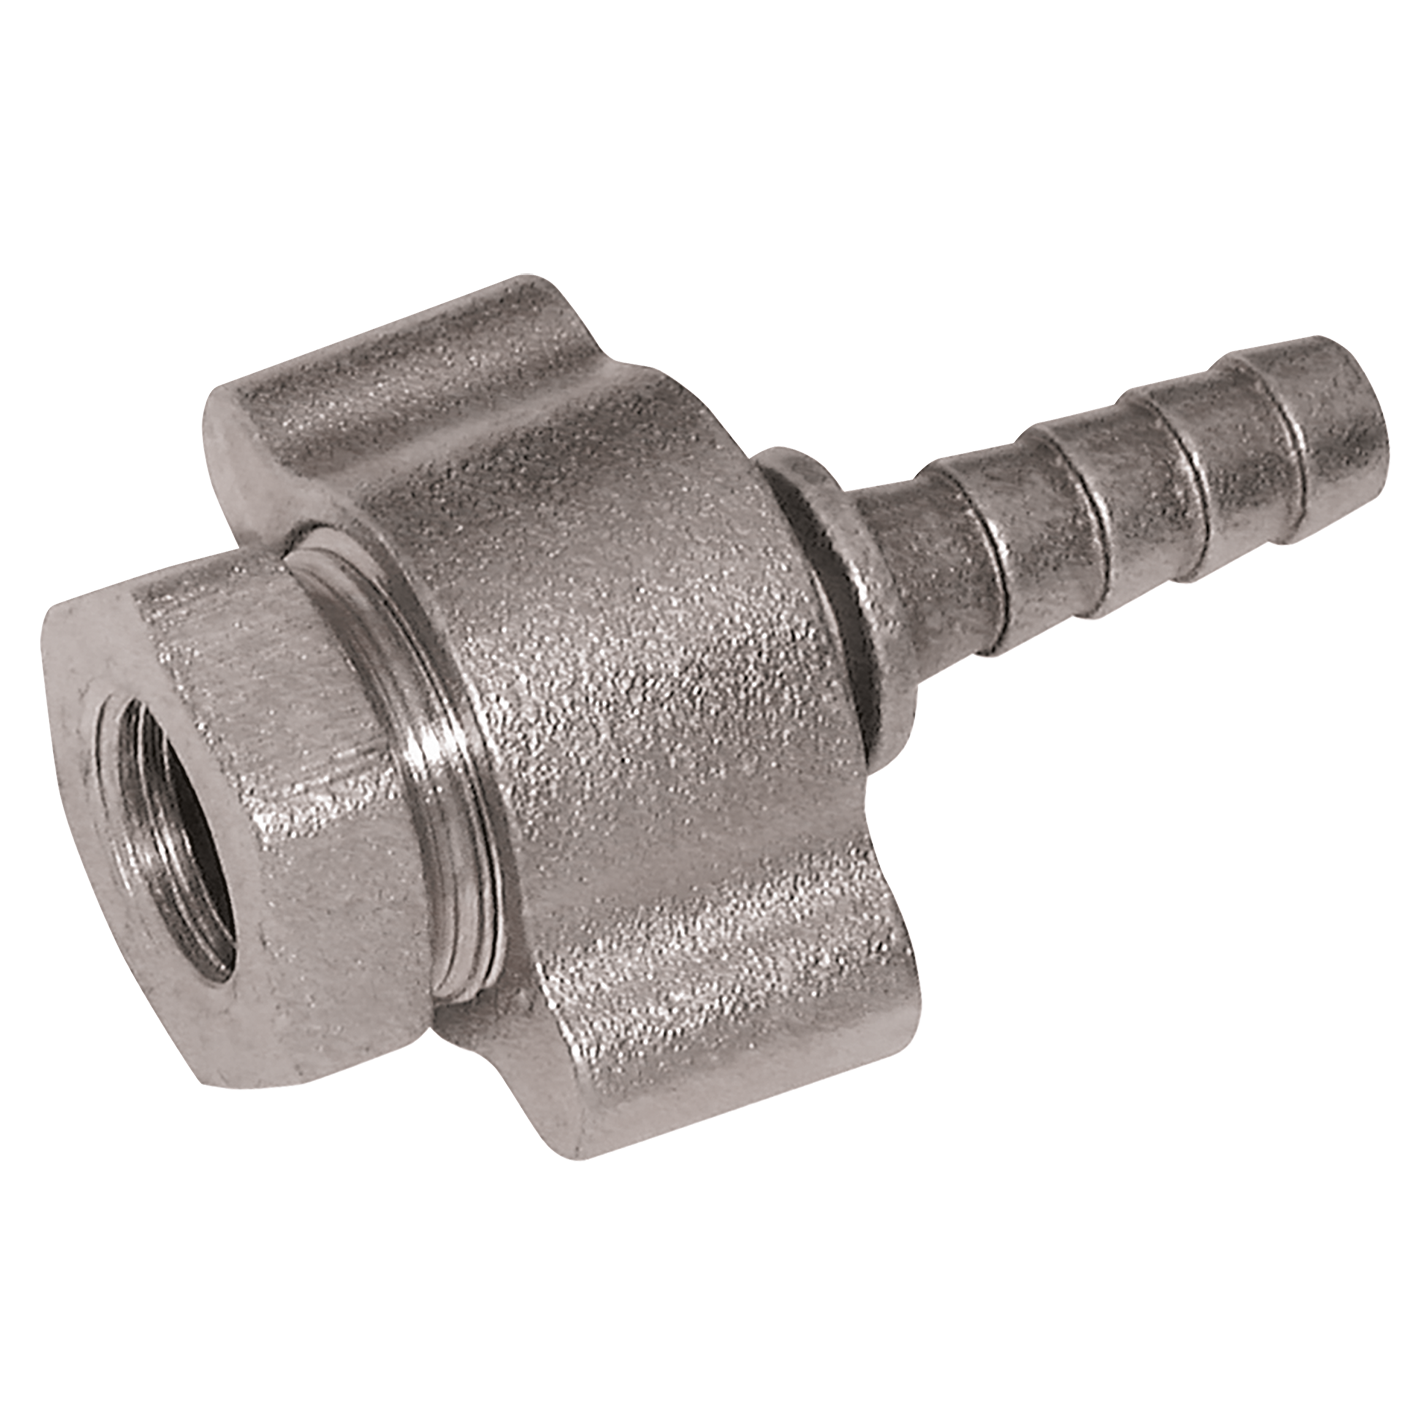 1.1/4" BSPP X1.1/4" HT GROUND JOINT COUP